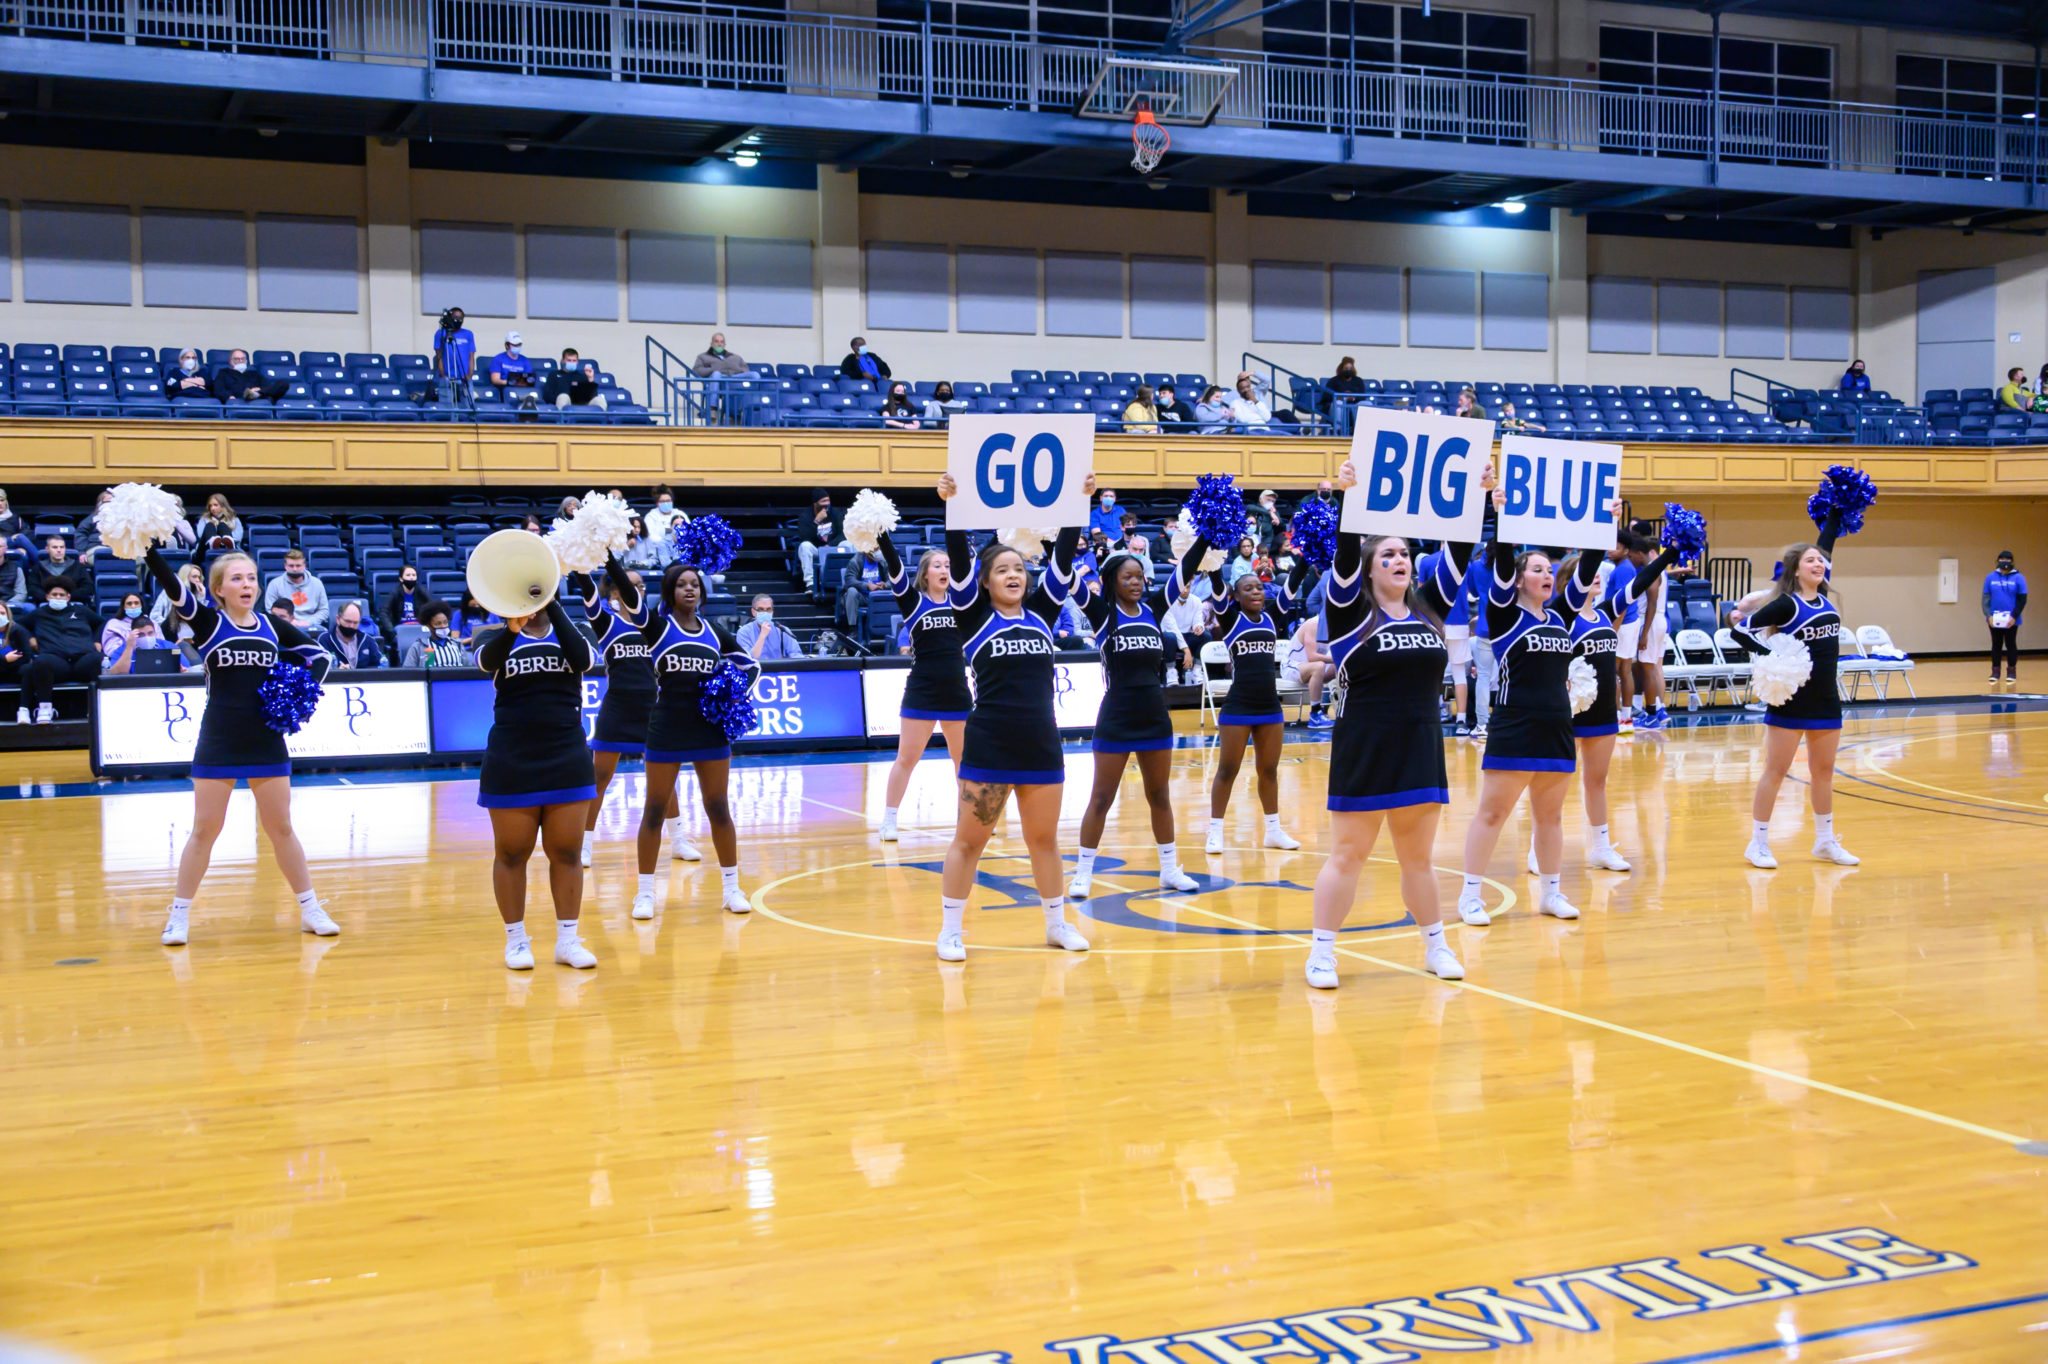 Cheerleaders hold signs on the basketball court